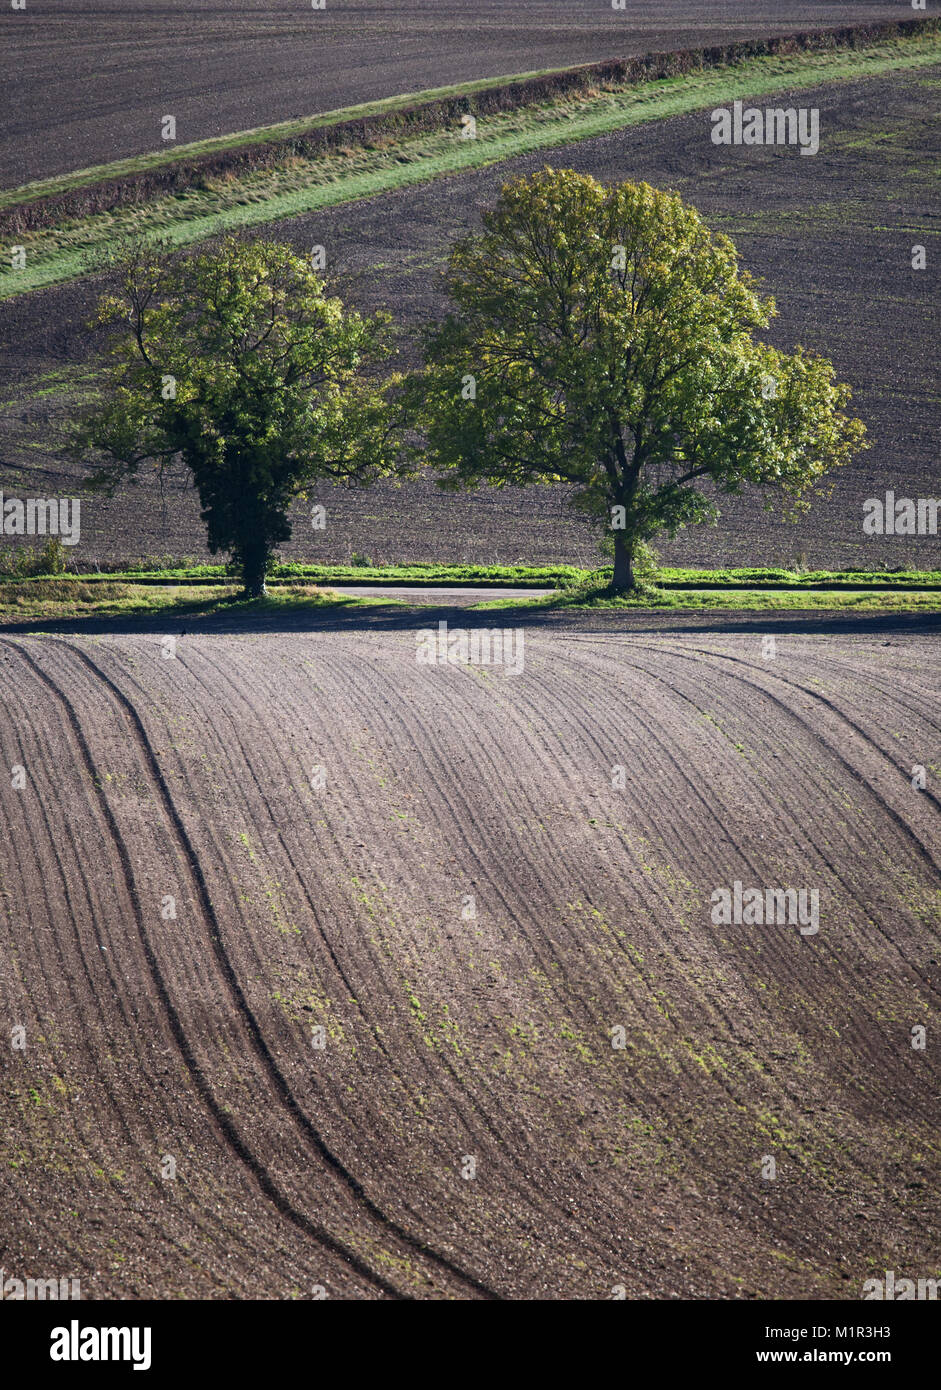 Undulating patterns created by ploughed field with trees, Buckinghamshire, England Stock Photo